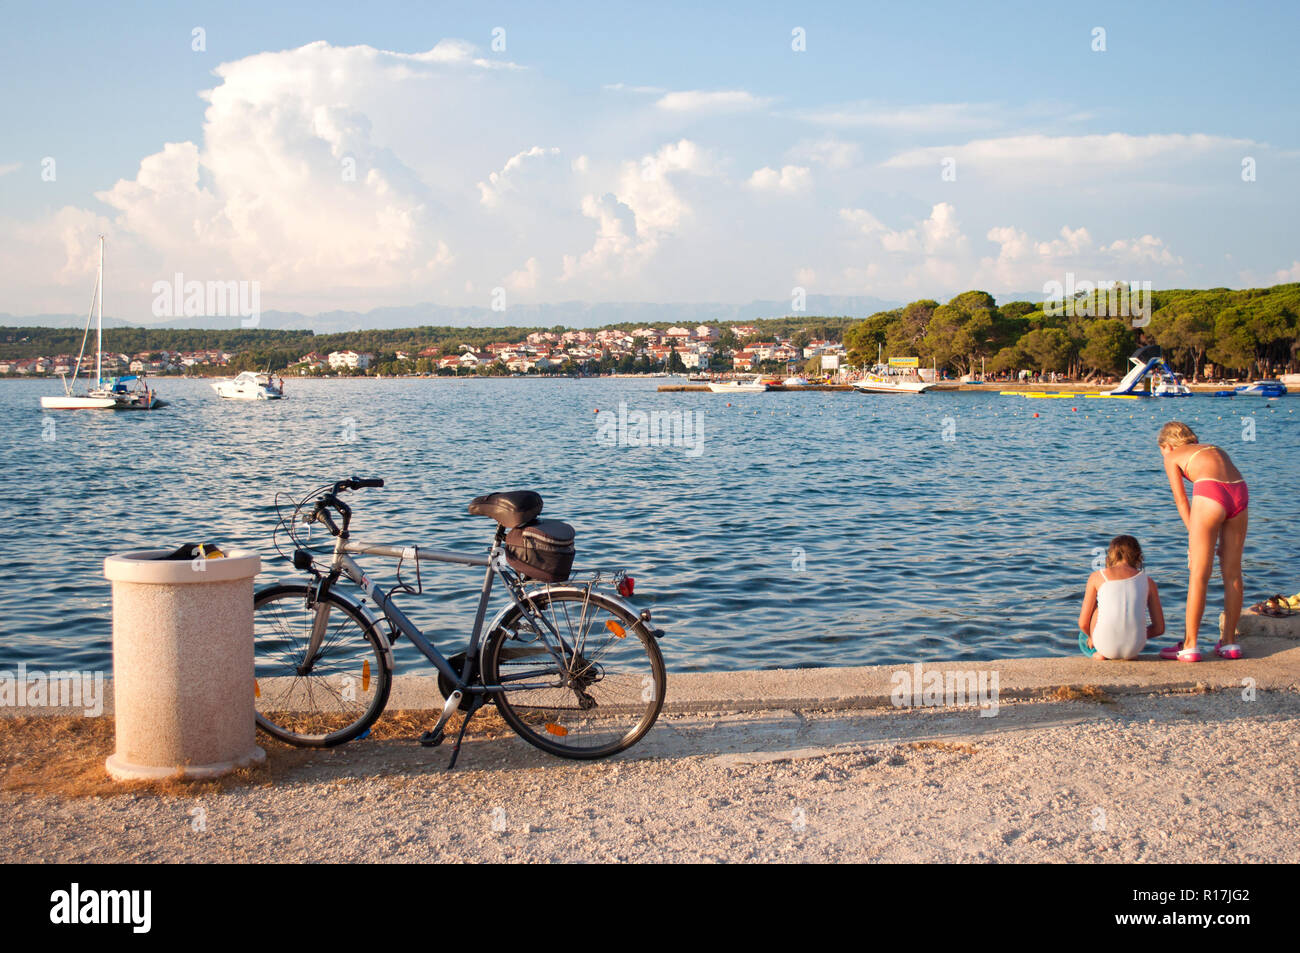 Two girls playing on a sea shore near a bicycle. View on a cozy little Croatian town Zadar covered in white fluffy clouds Stock Photo